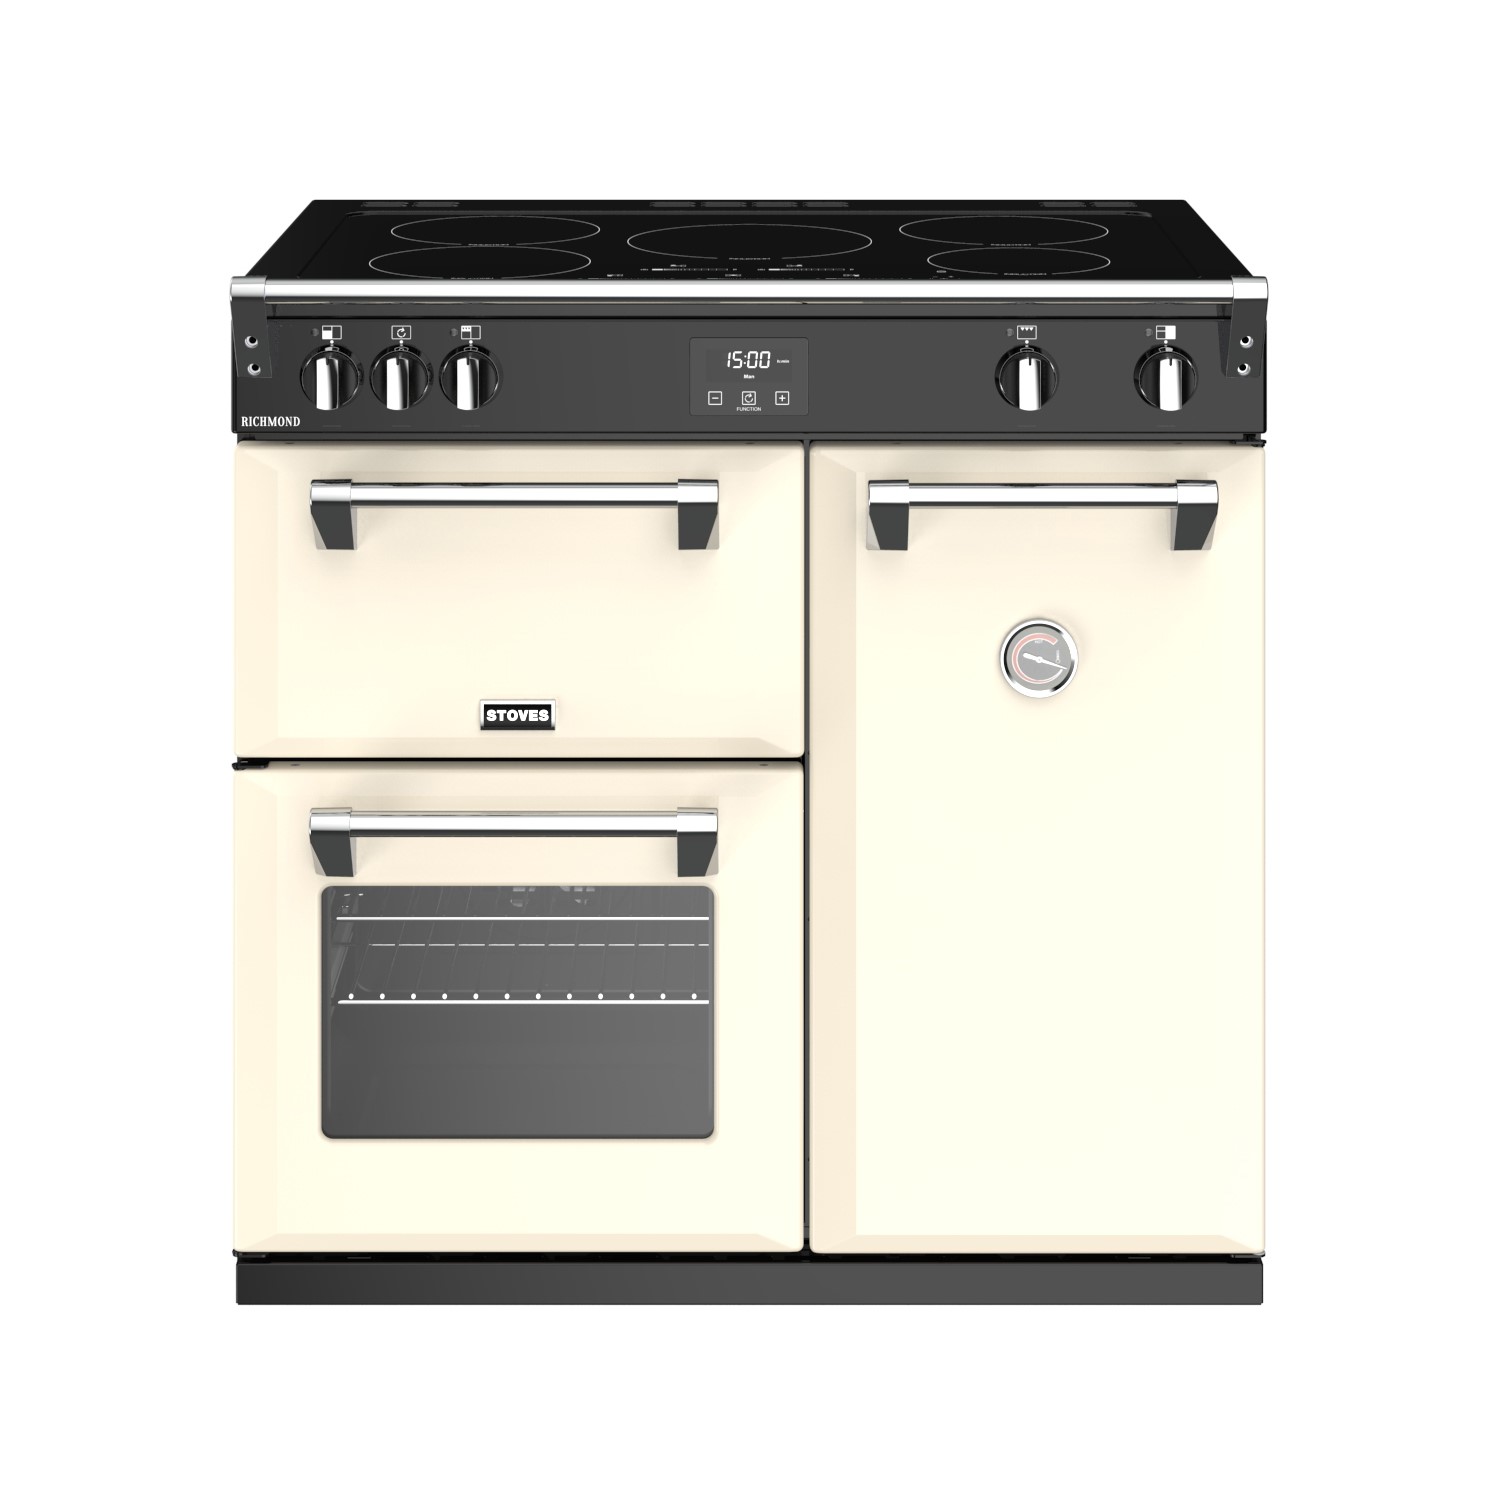 Stoves Richmond S900Ei 90cm Electric Range Cooker with Induction Hob - Cream